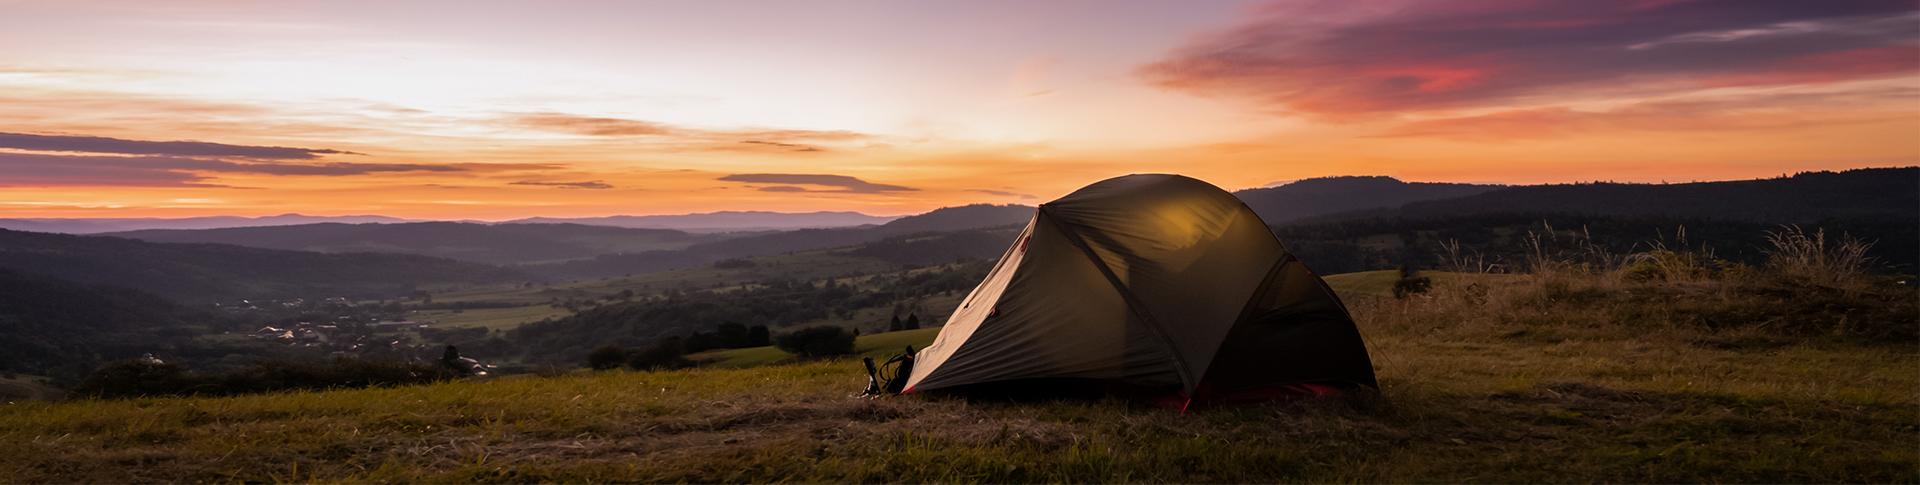 Banner image for How to choose a wild camp spot - 5 top tips banner image